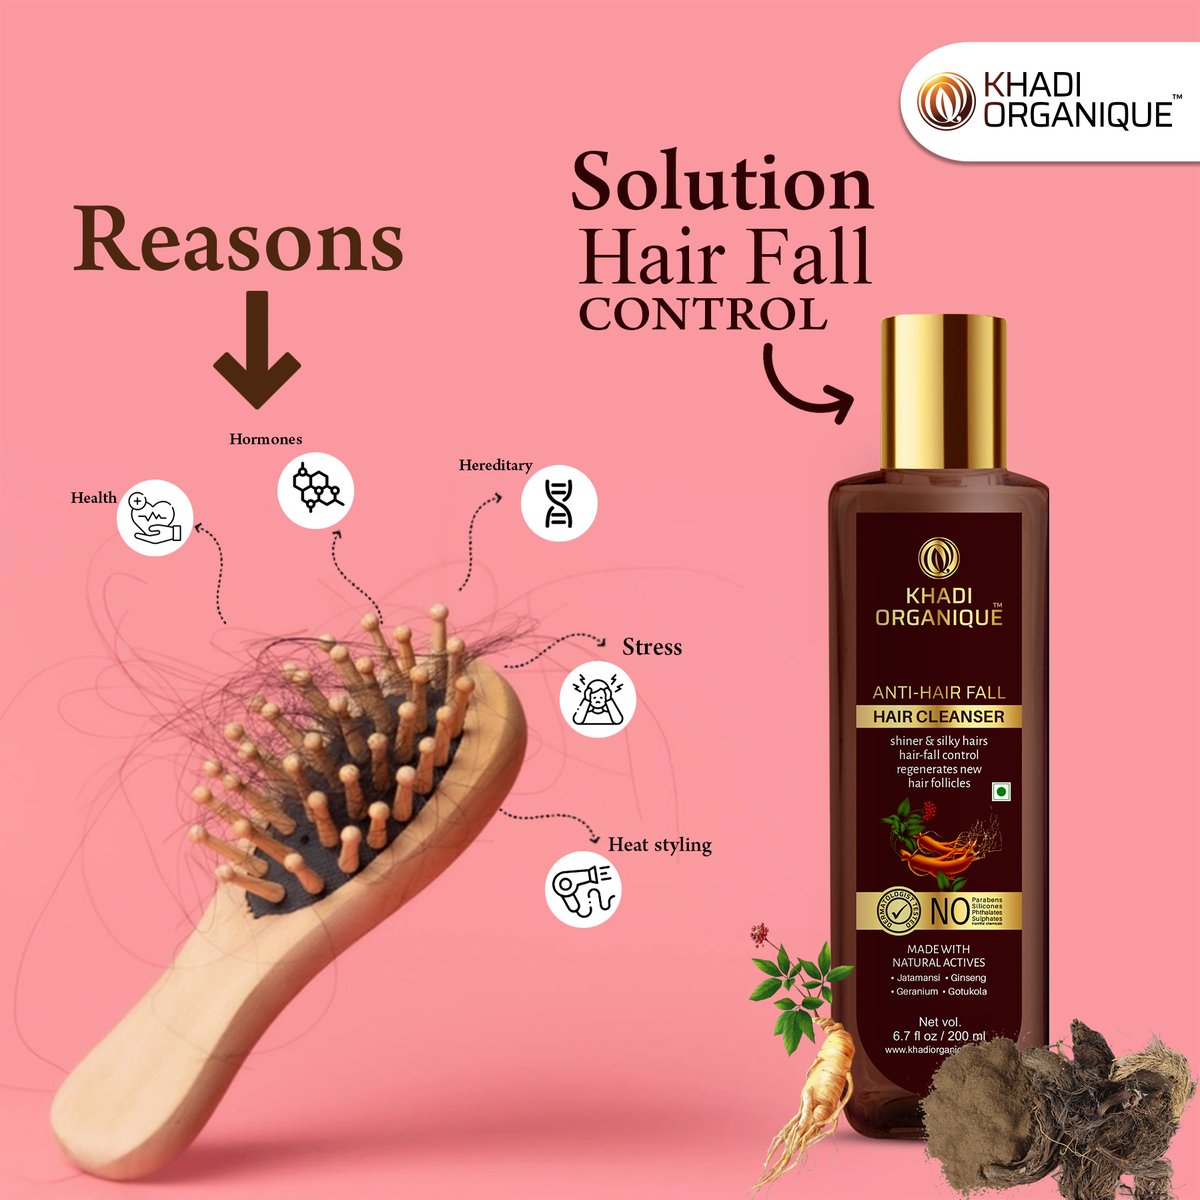 Perfect solution for controlling hair fall with Khadi Organique Anti-Hairfall Hair Cleanser for a luxurious, glamorous look
.
Shop Now 🛒 :-bit.ly/446wbmw
.
#khadiorganique #khadi #naturalingredients #natural🌿 #organic #auravedic #hair #cleanser #antihairfall #hairfall